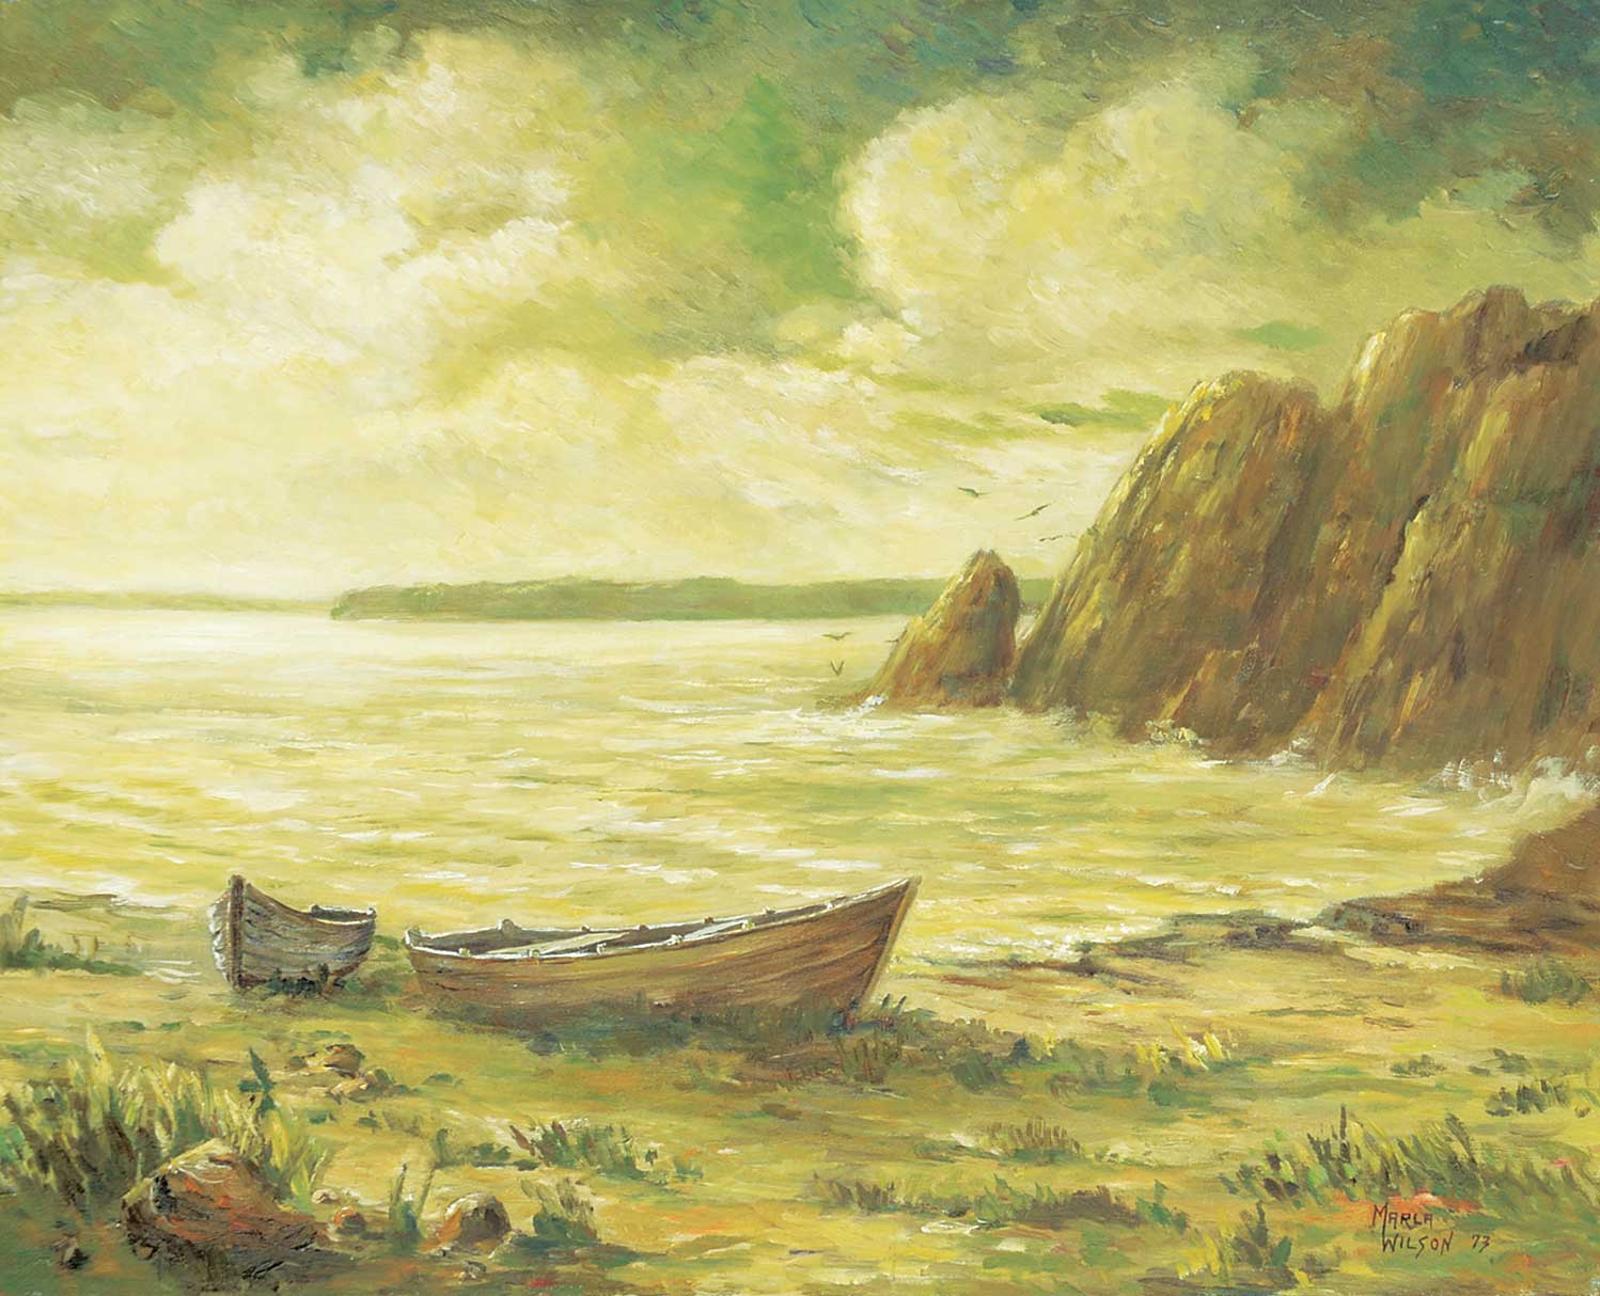 Marla Wilson (1945) - Untitled - Boats on the Shore